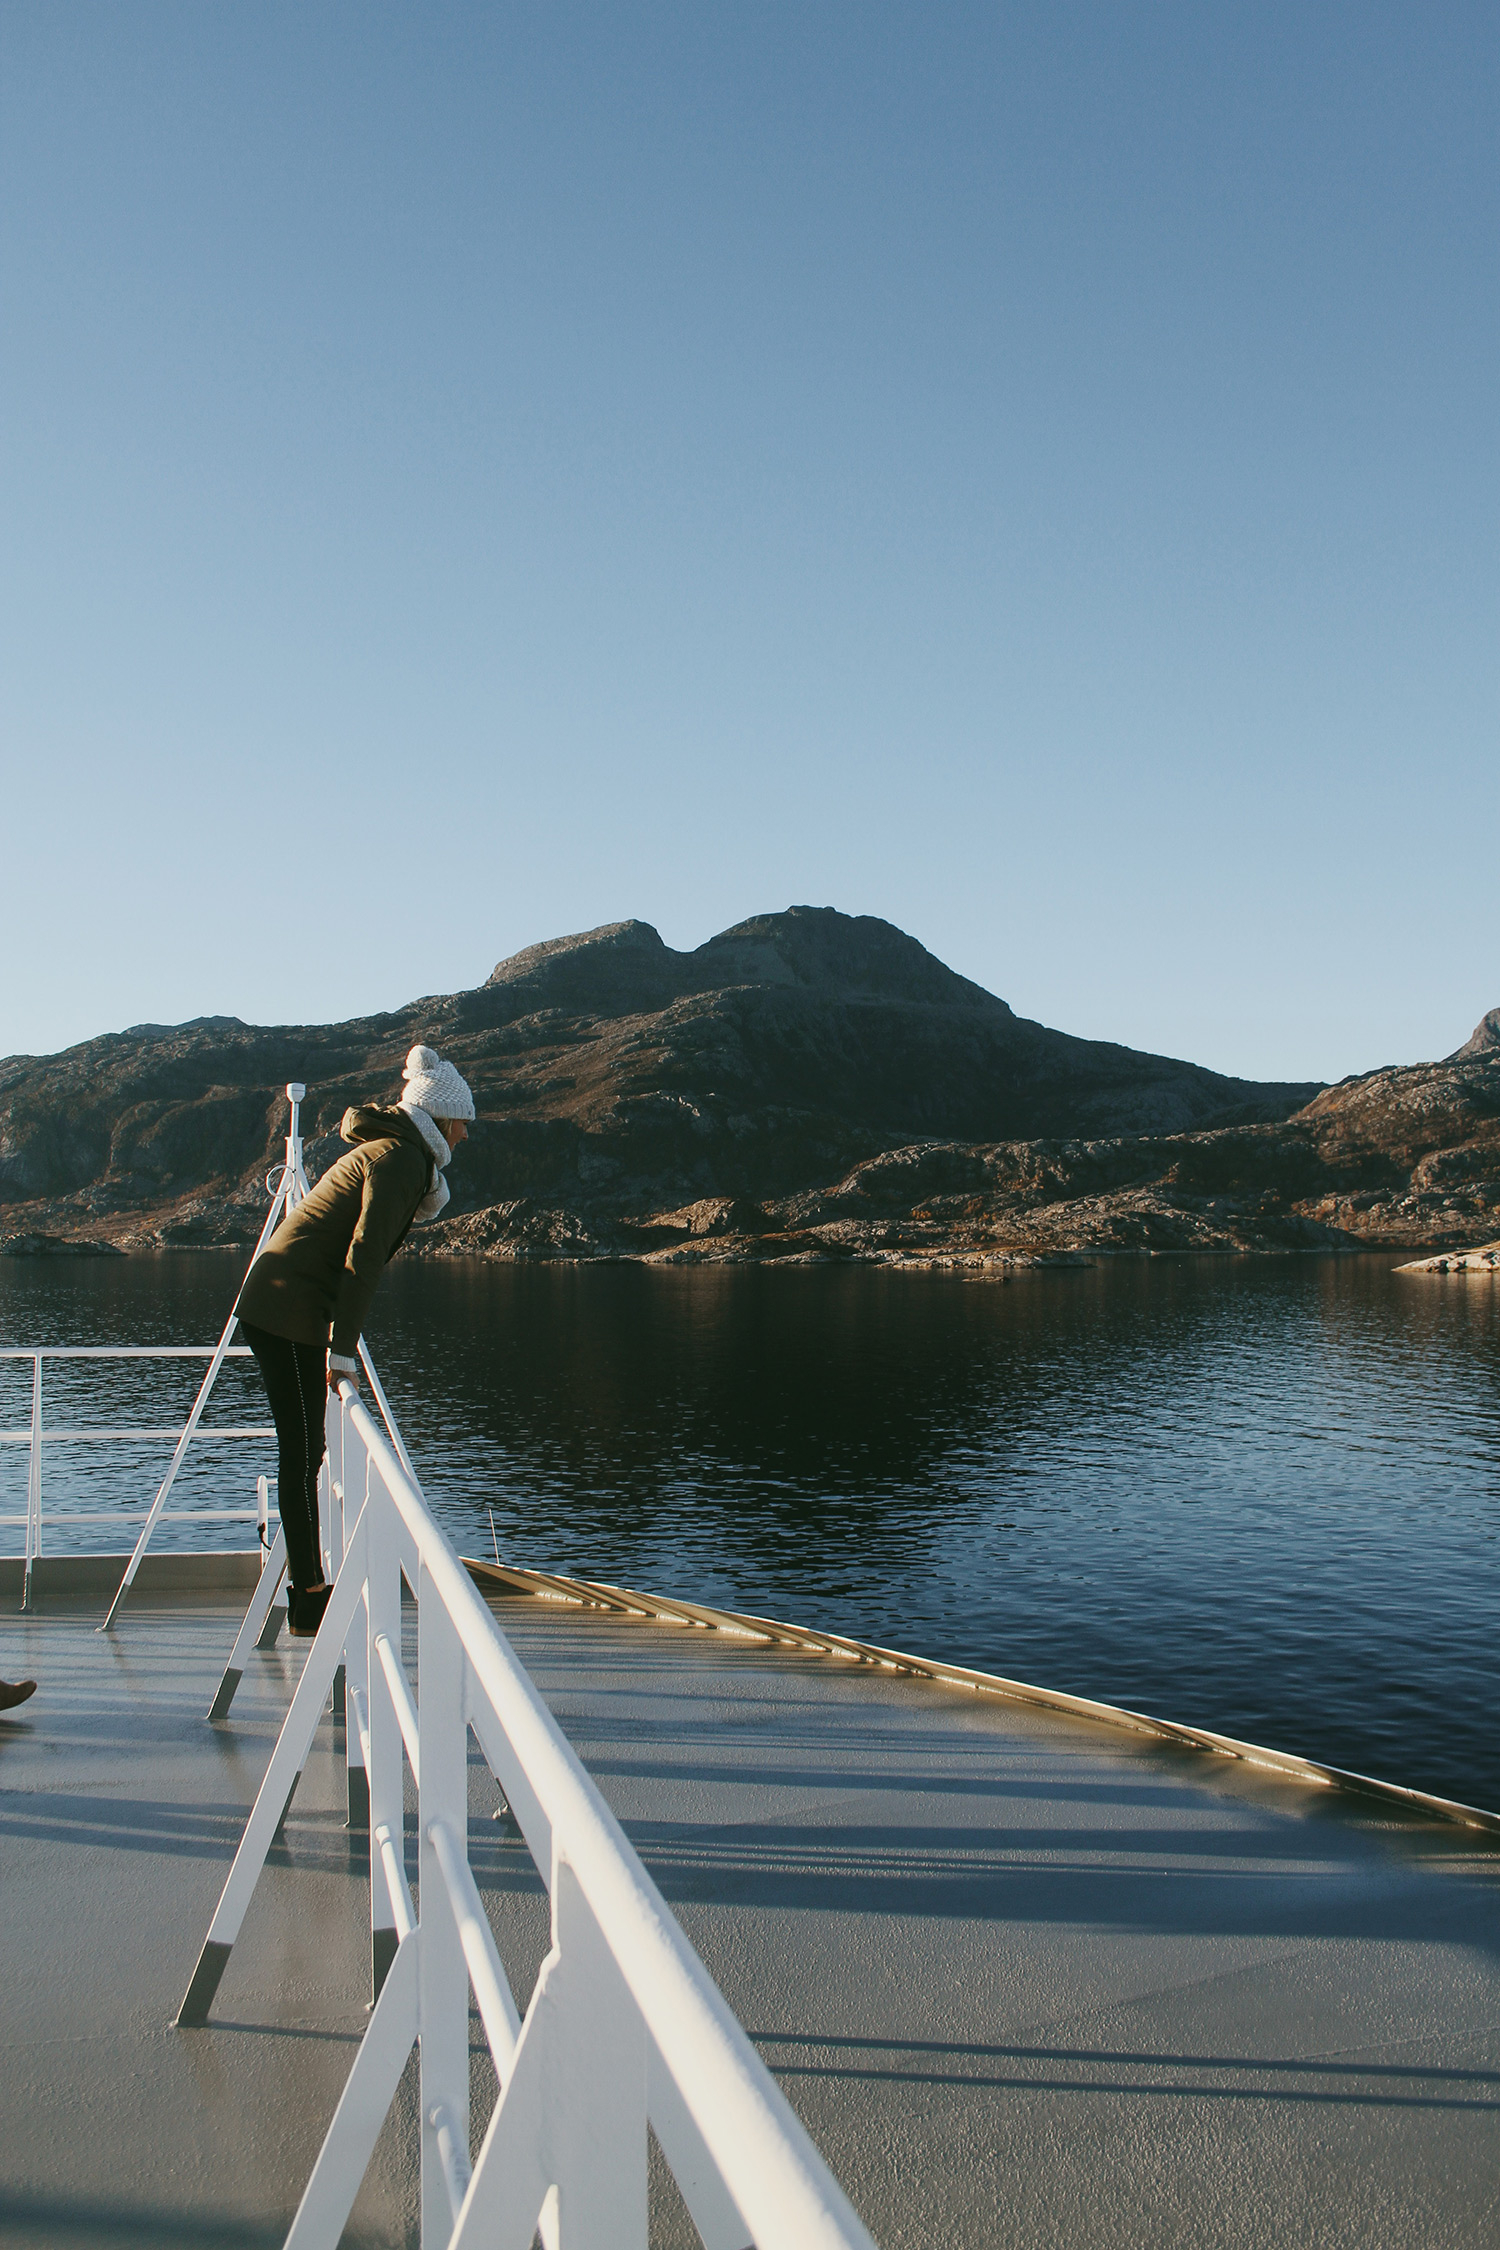 A #ROXYSneakPeek Behind our Photoshoot in Norway with Mainei Kinimaka